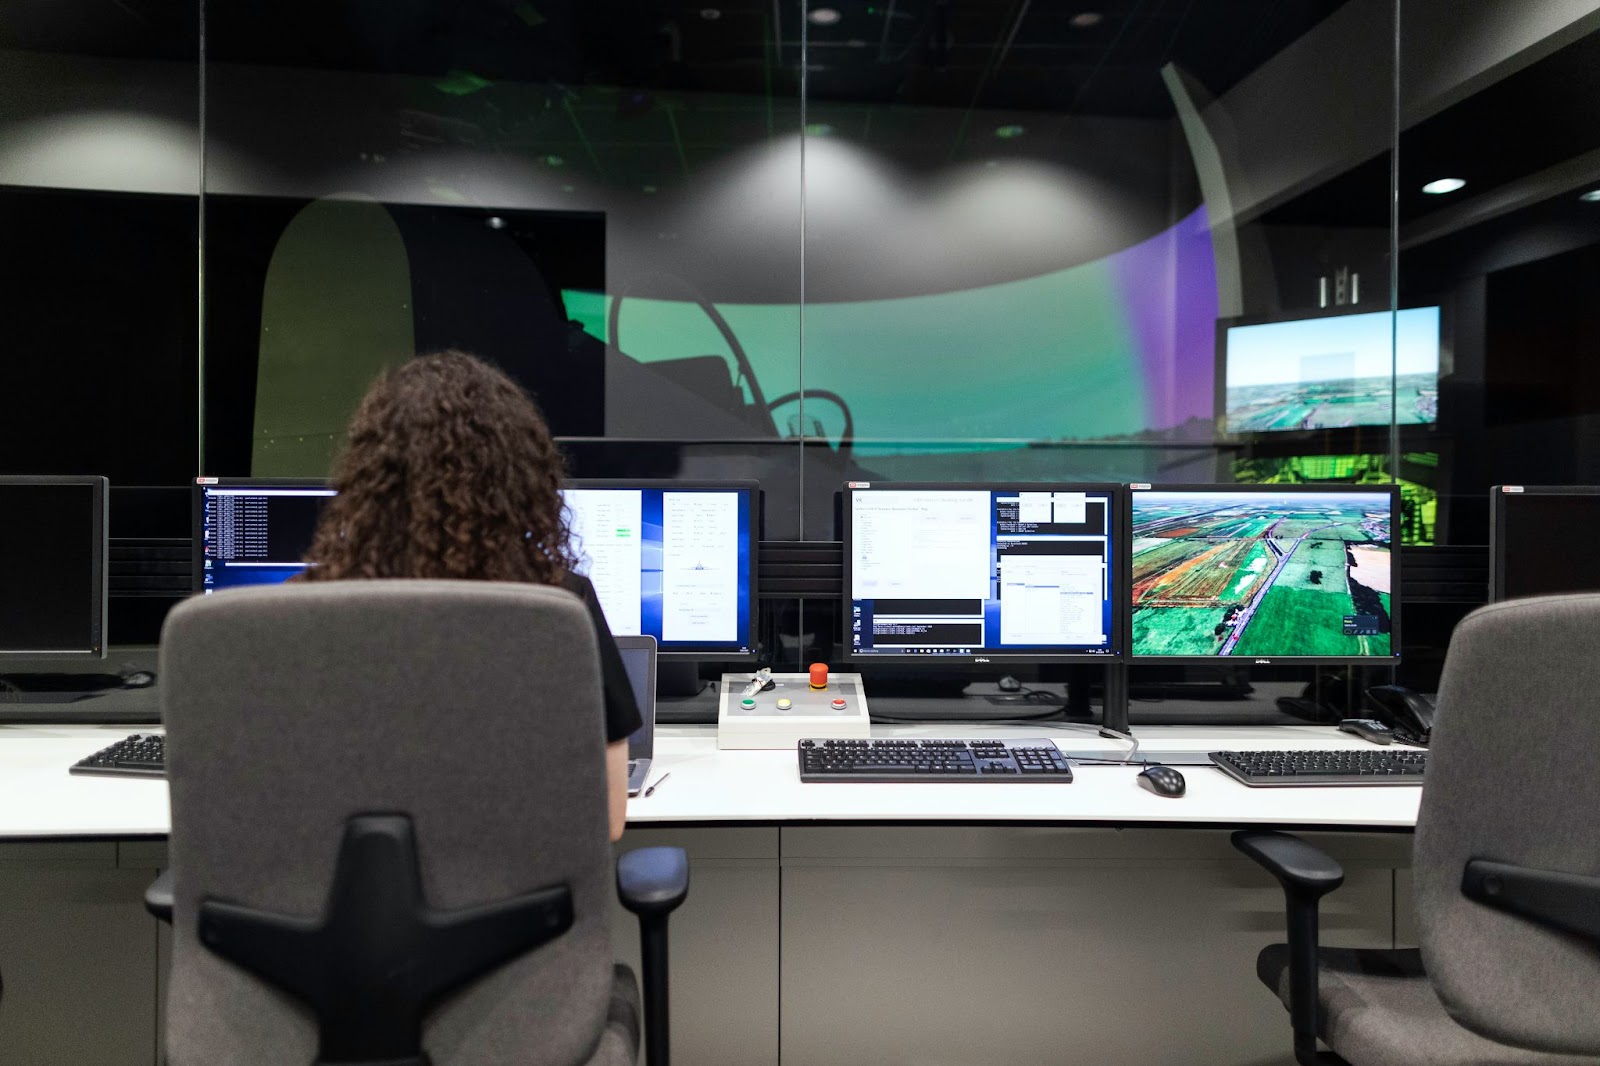 A person in an operations center surrounded by screens displaying various data visualizations and code.